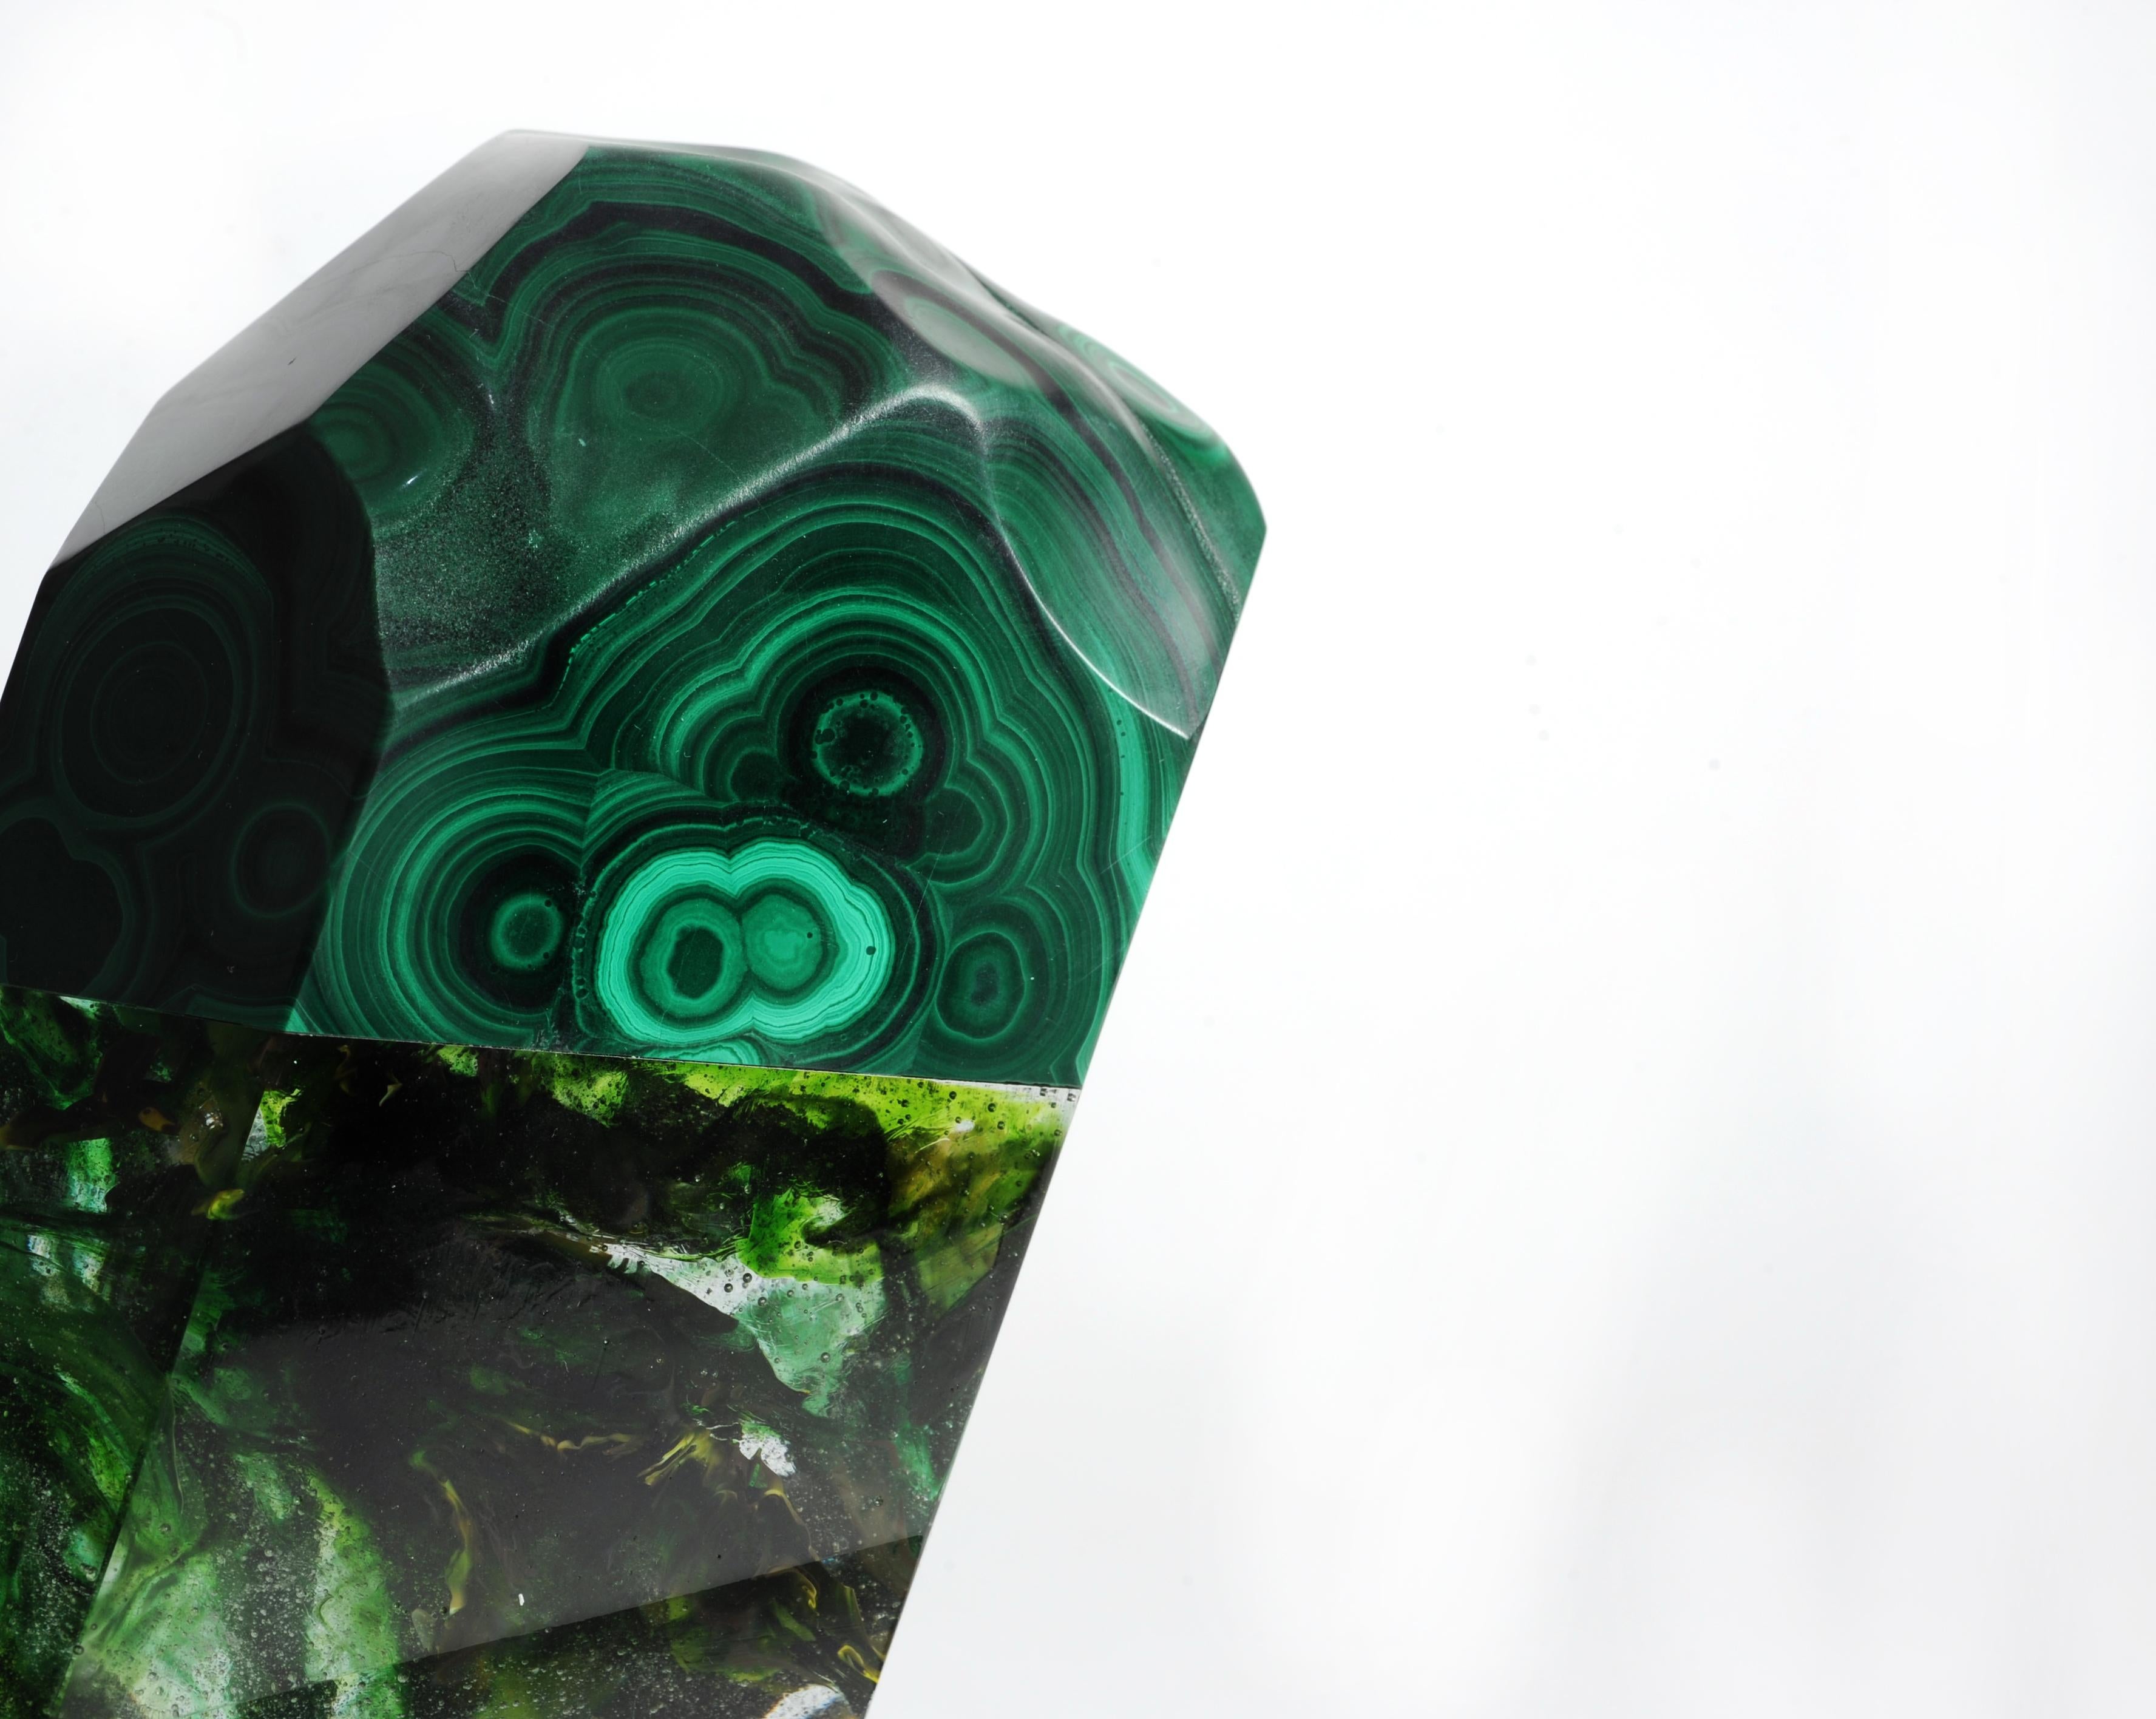 Meiosis, African malachite and glass sculpture from TYME collection, a collaboration by Orfeo Quagliata and Ernesto Durán.

TYME collection a dance between purity and detail bring a creation of unique pieces merging nature’s gems and human hand.